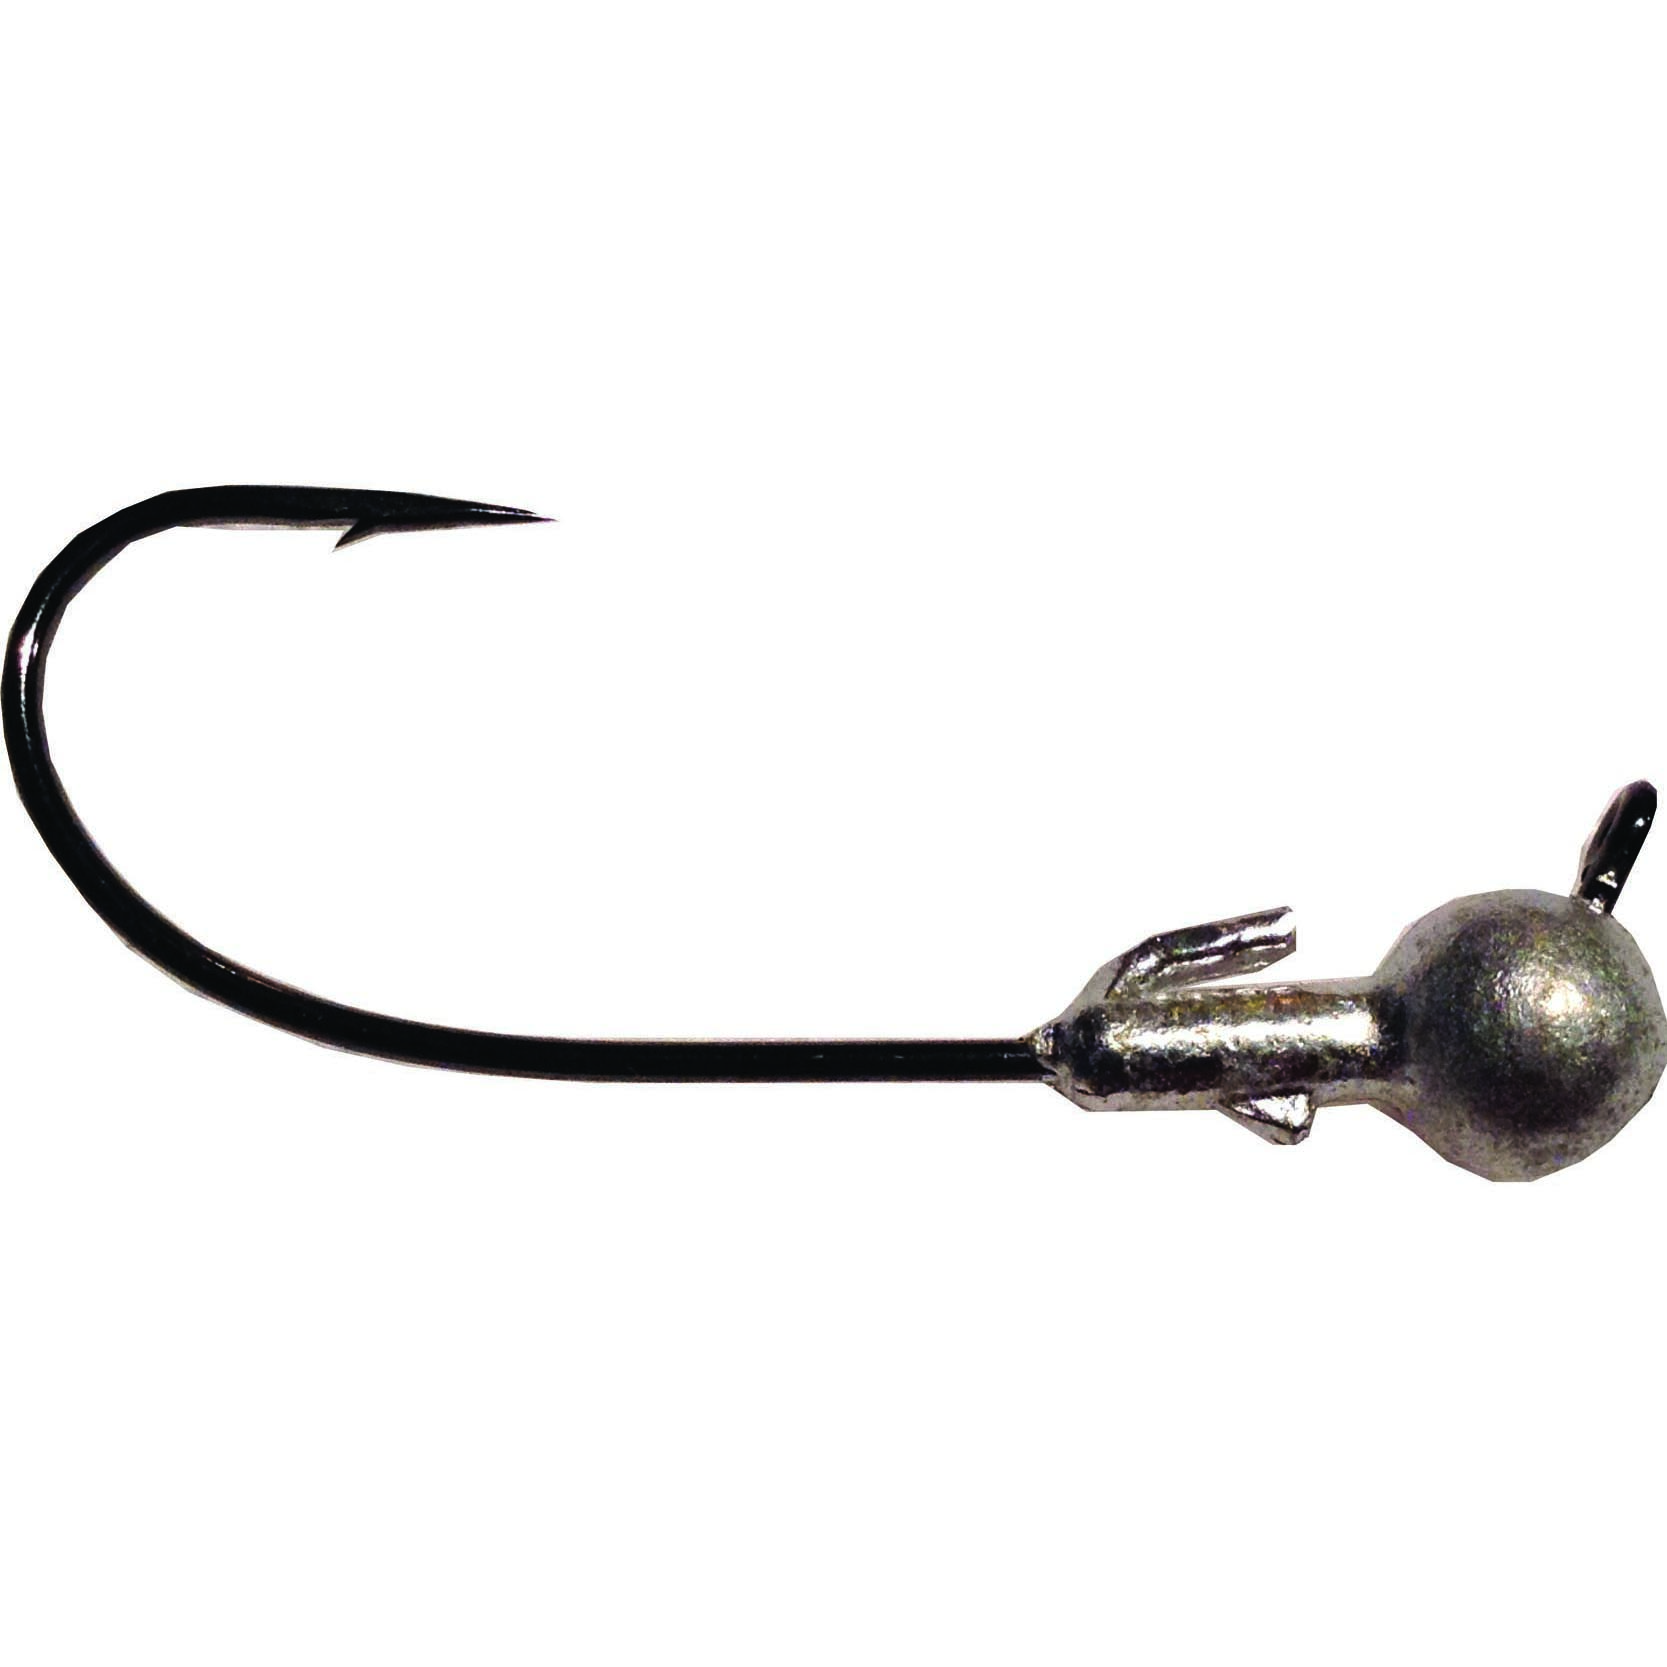 Bite-Me Tackle Finesse Shakey Jig